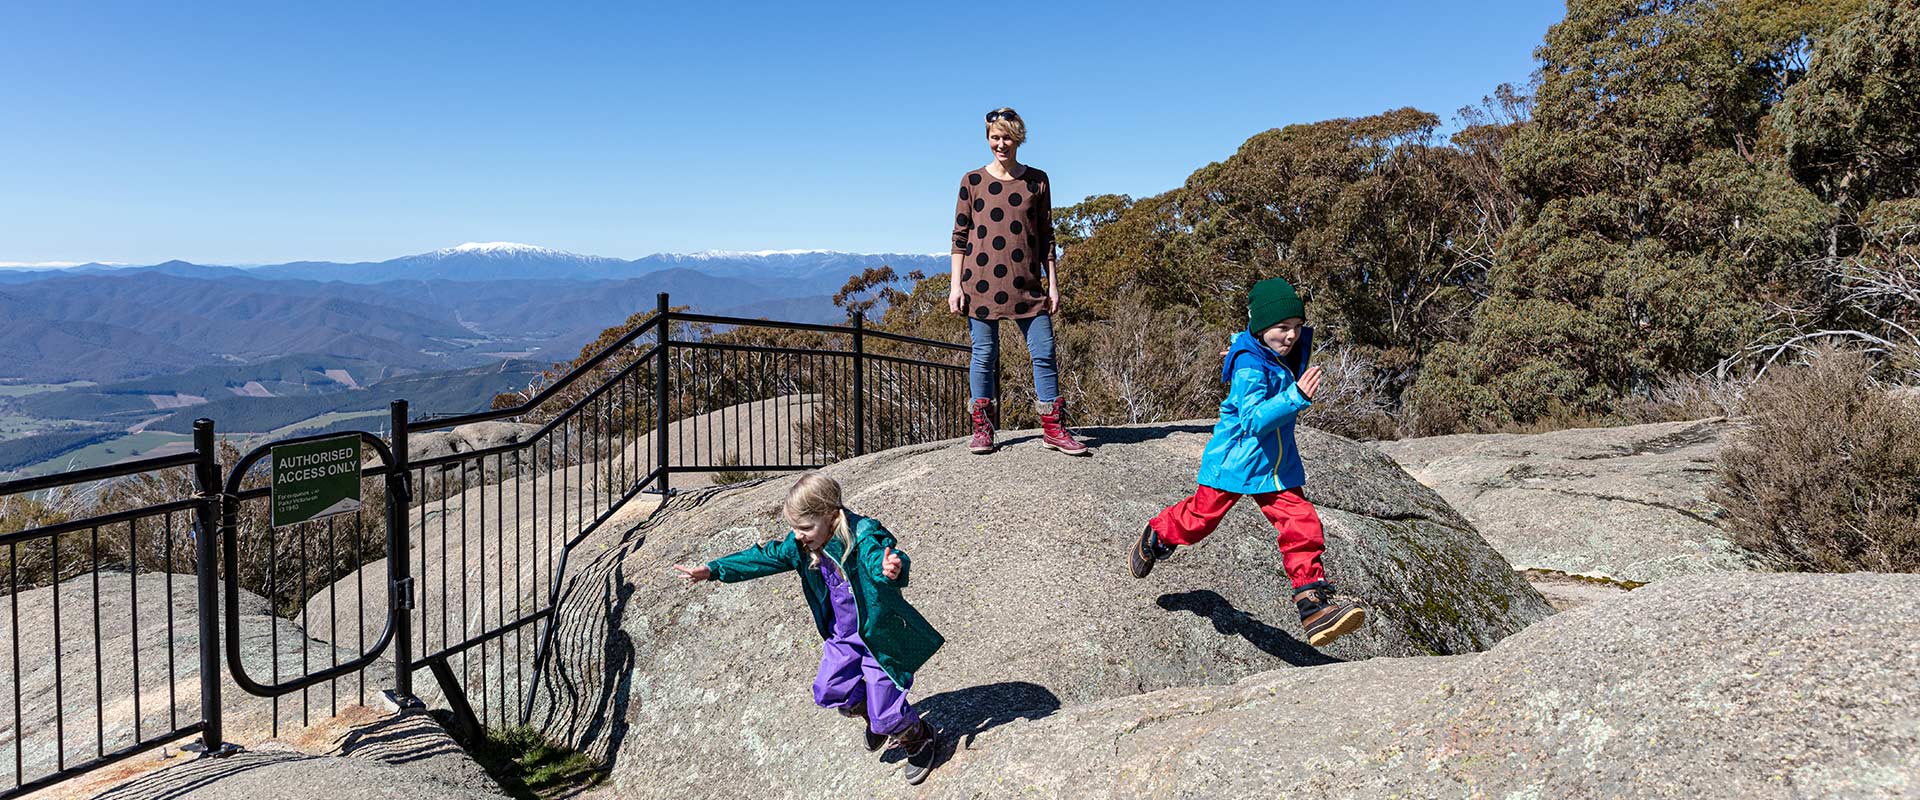 Two small children jump over granite boulders infront of their watching mother, with snow capped mountains in the background